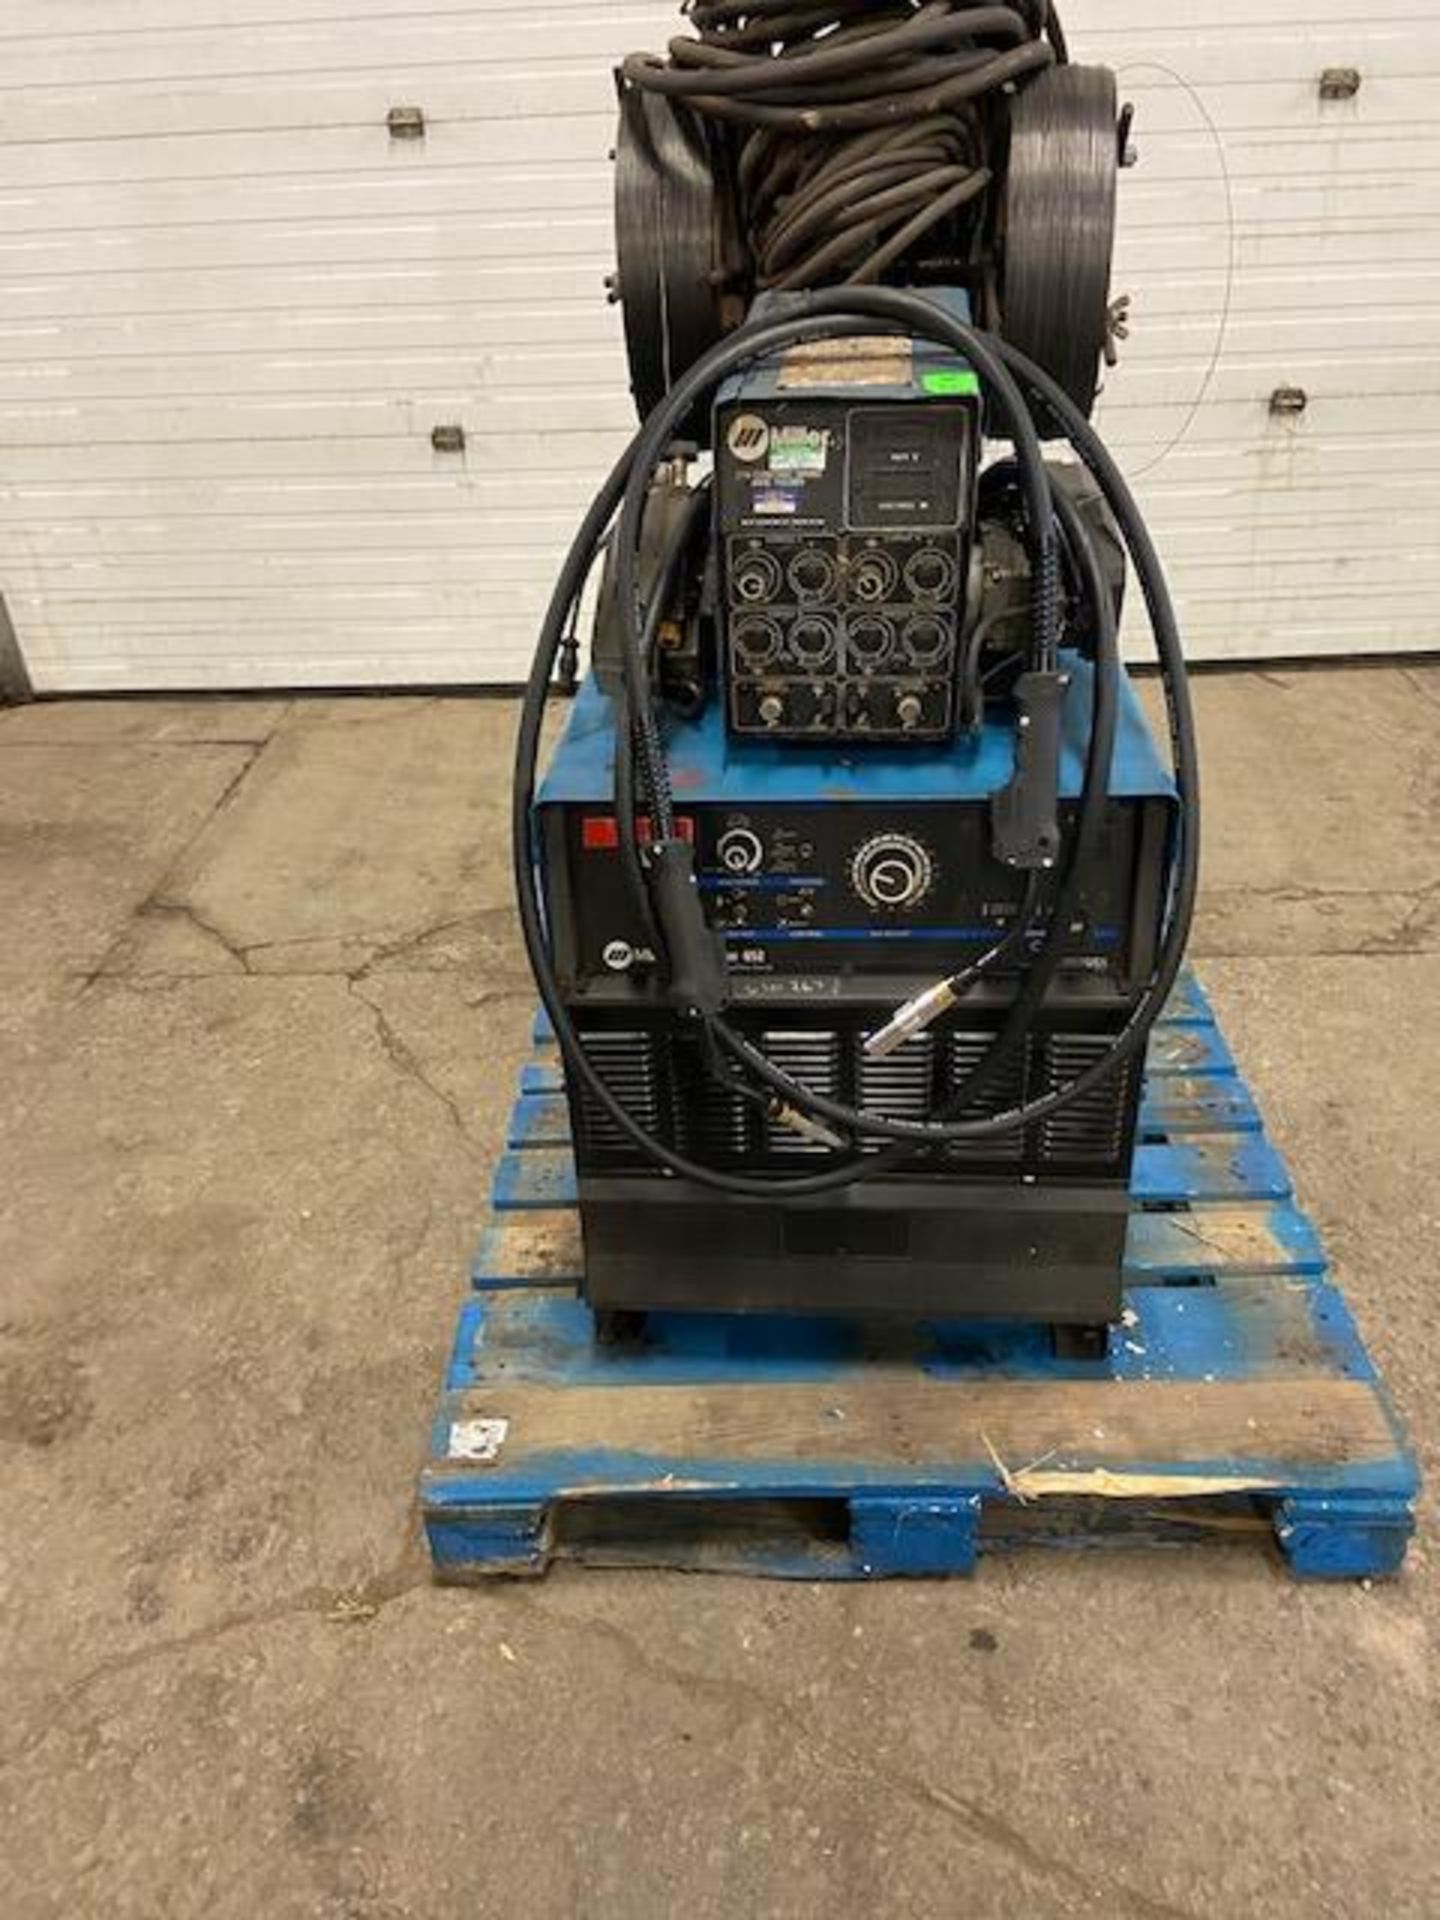 Miller Dimension 652 Mig Welder 650 Amp Mig Tig Stick with DUAL 60 Series Wire Feeder - Image 2 of 2